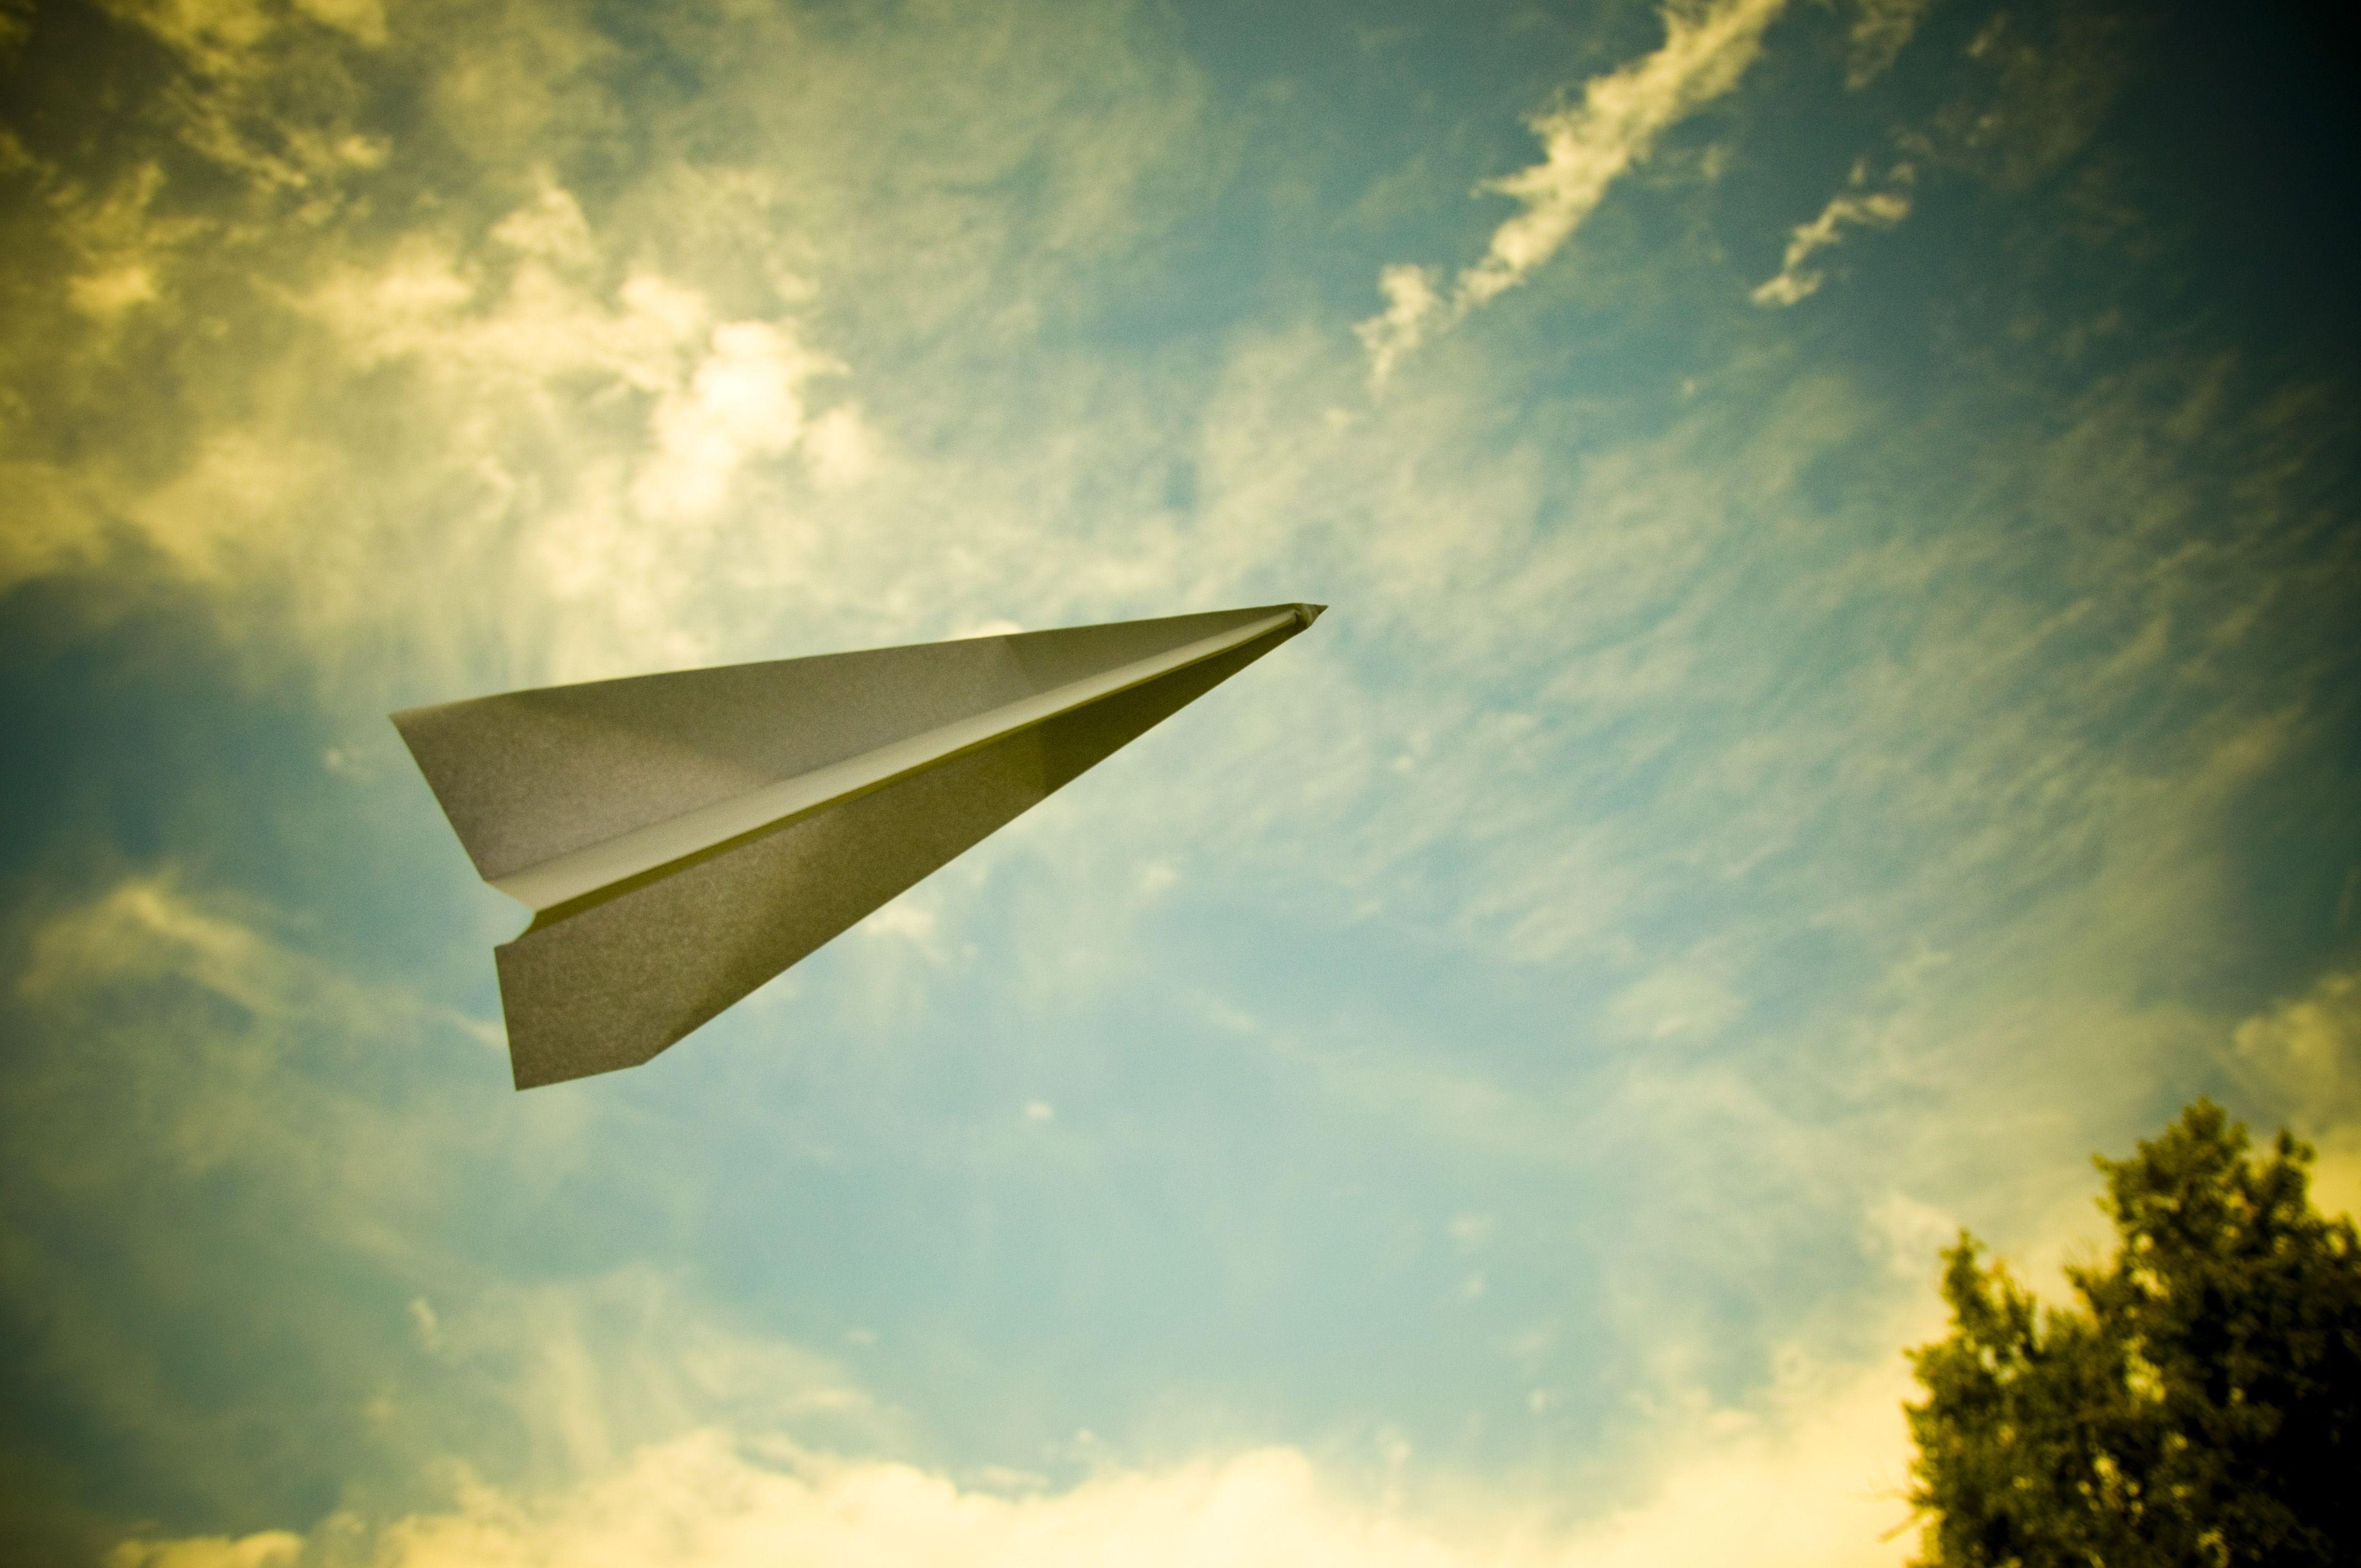 background research on paper airplanes